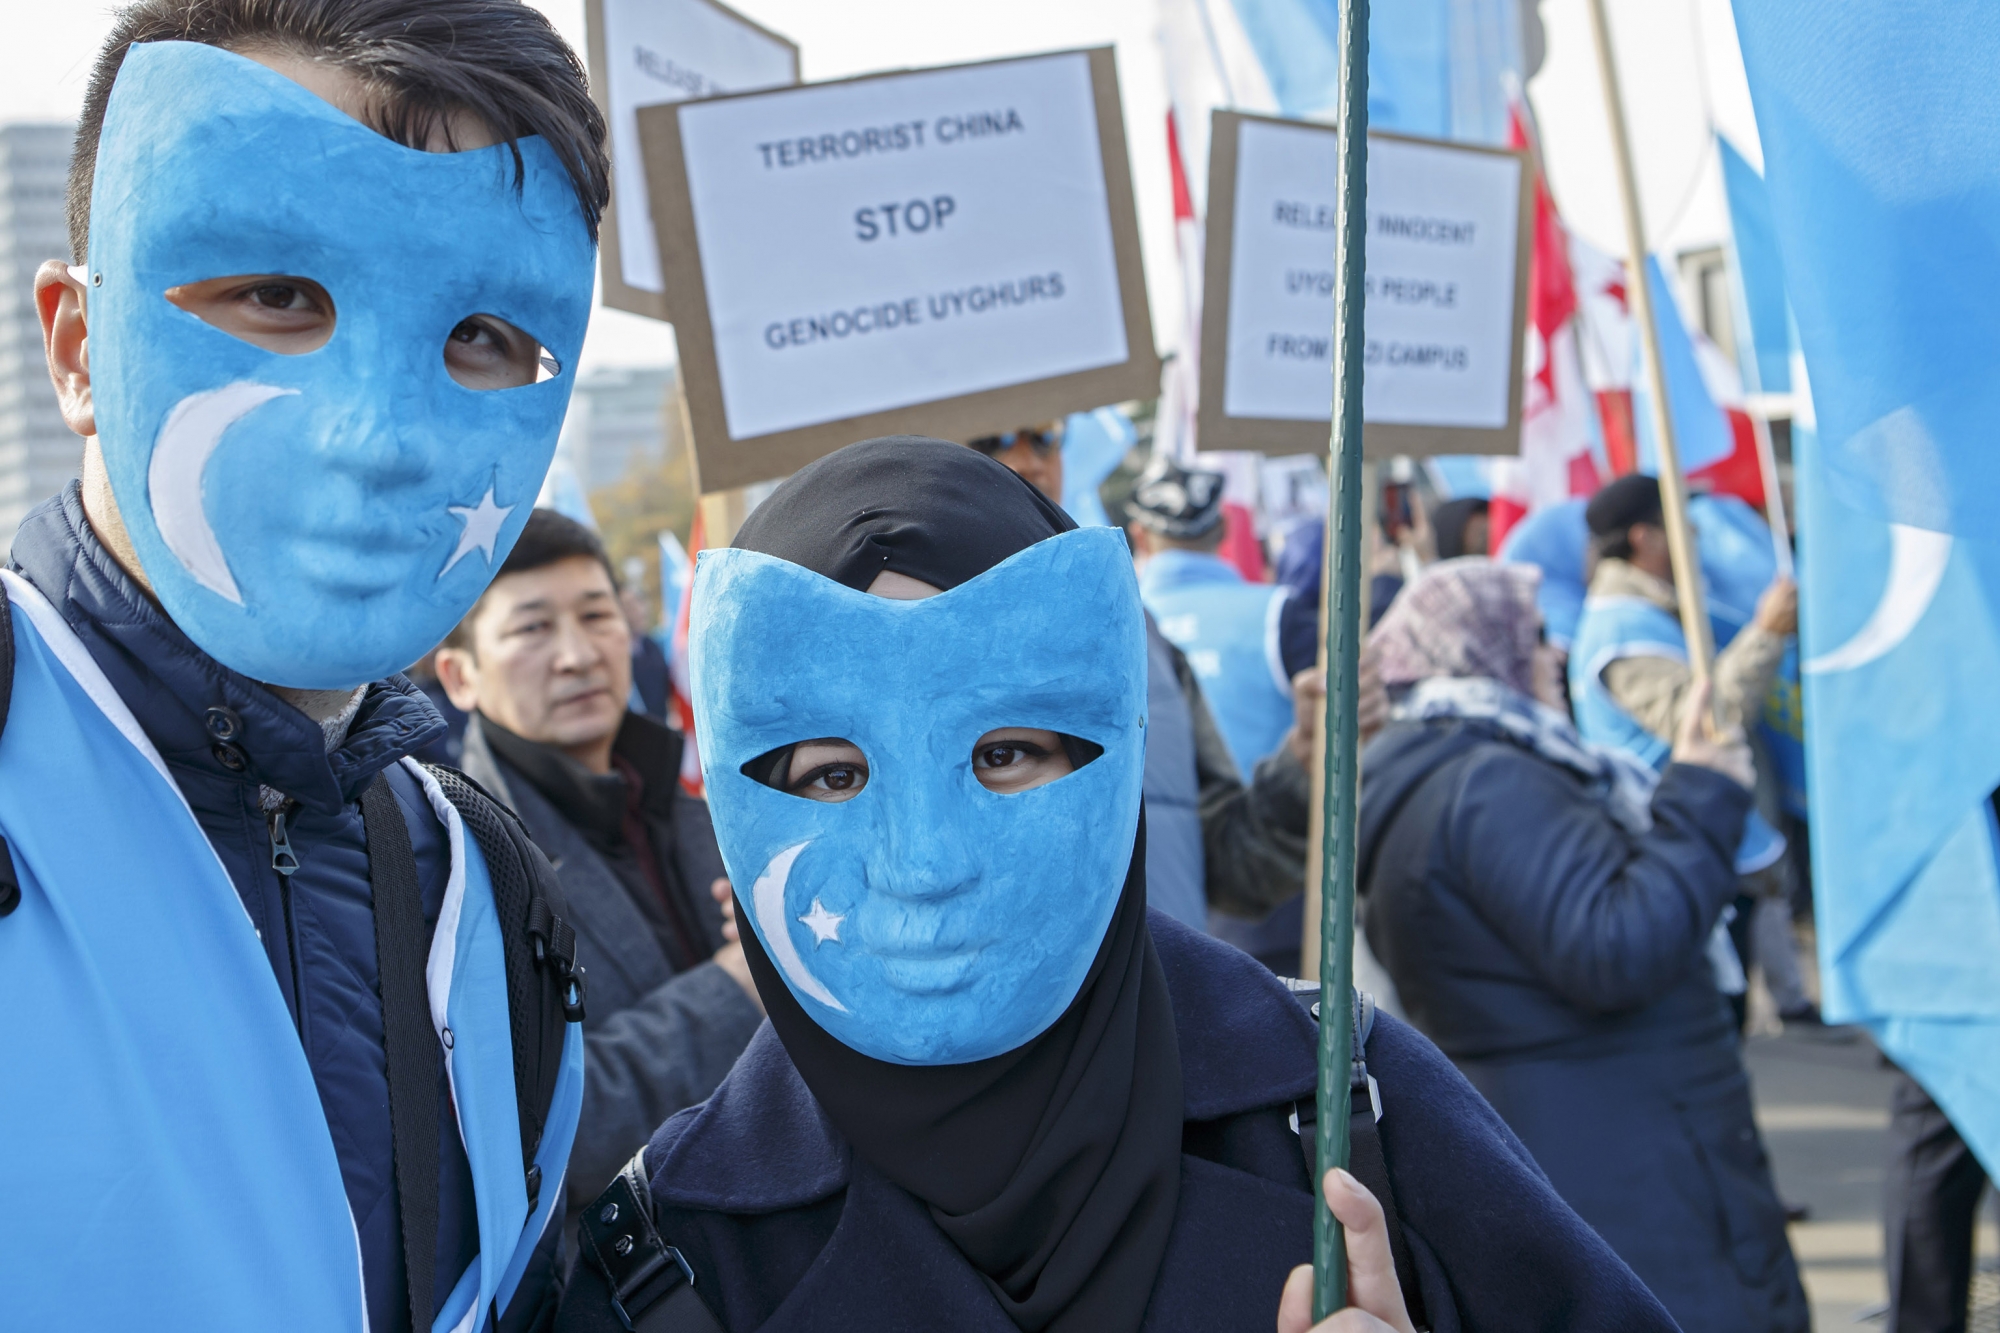 Uyghurs people demonstrate against China during the Universal Periodic Review of China by the Human Rights Council, on the place des Nations in front of the European headquarters of the United Nations, in Geneva, Switzerland, Tuesday, November 6, 2018. (KEYSTONE/Salvatore Di Nolfi)